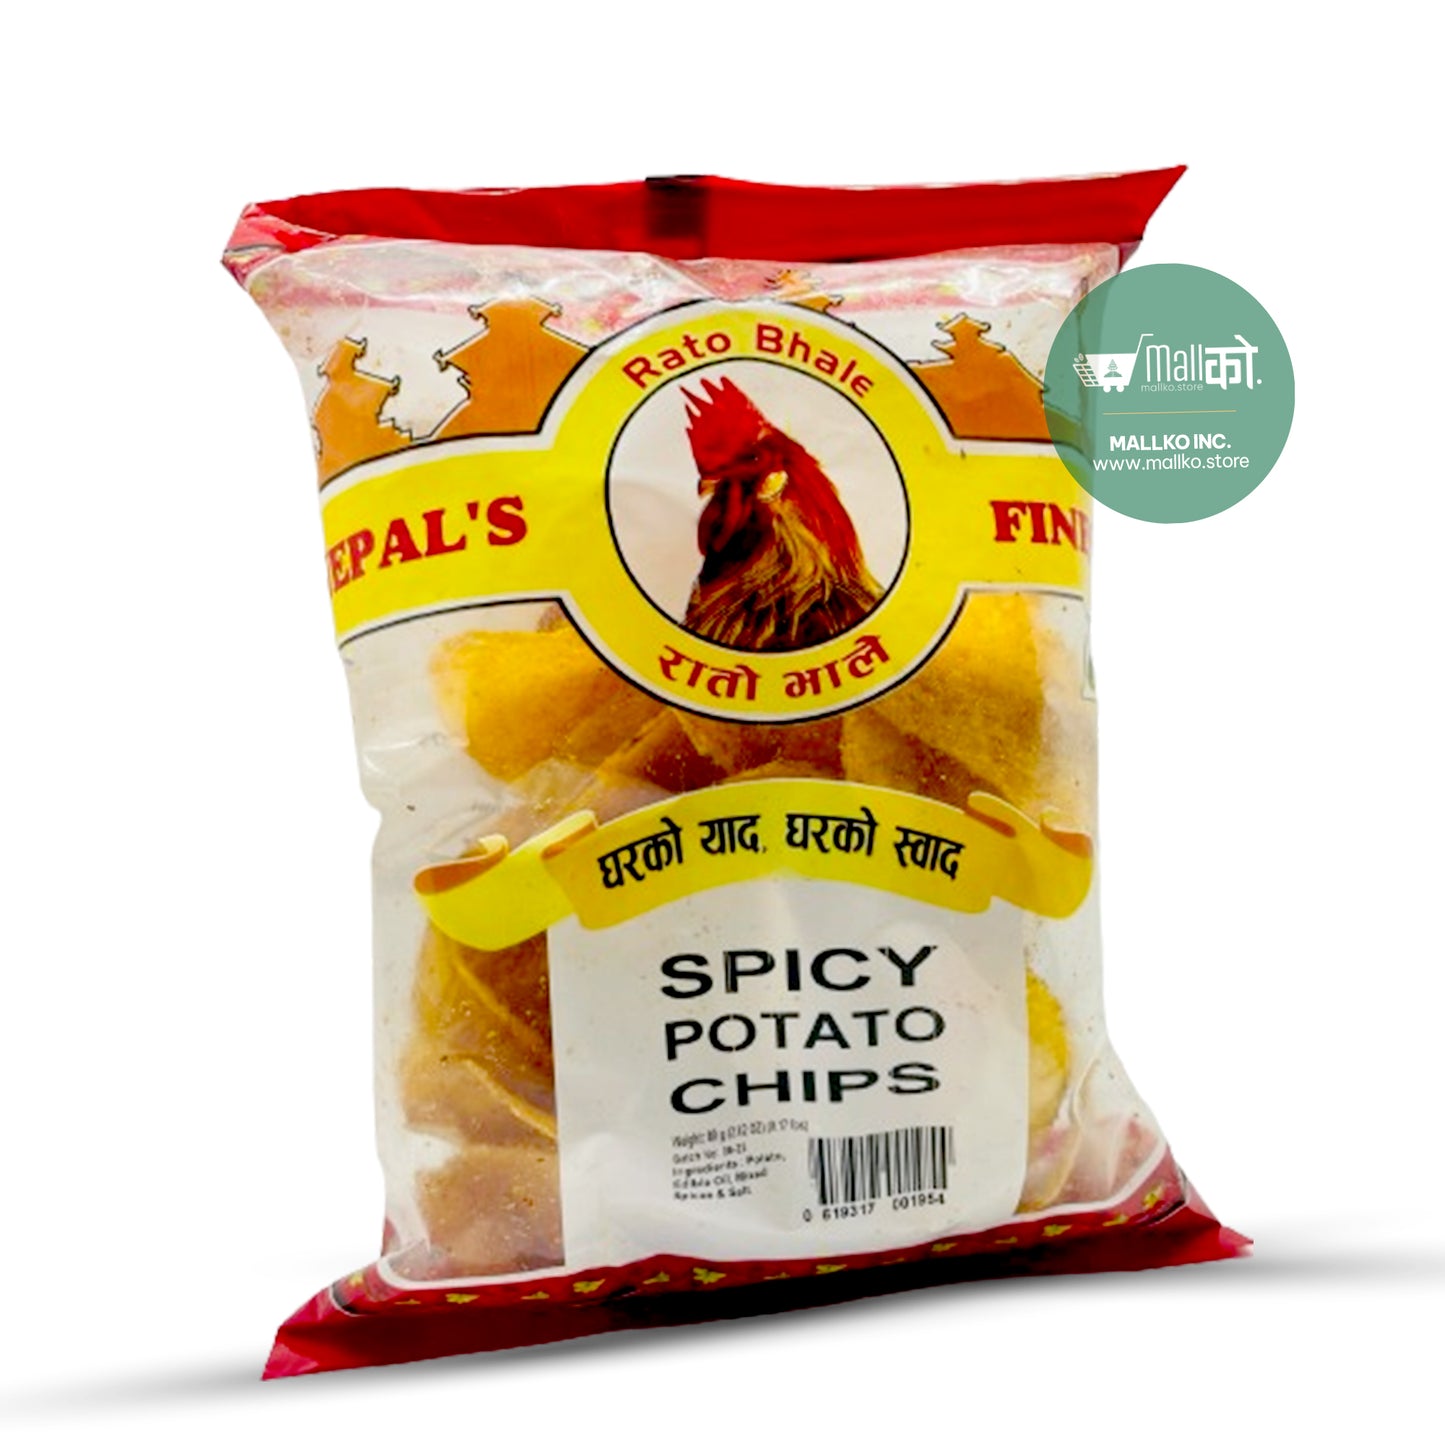 Spicy Potato Chips